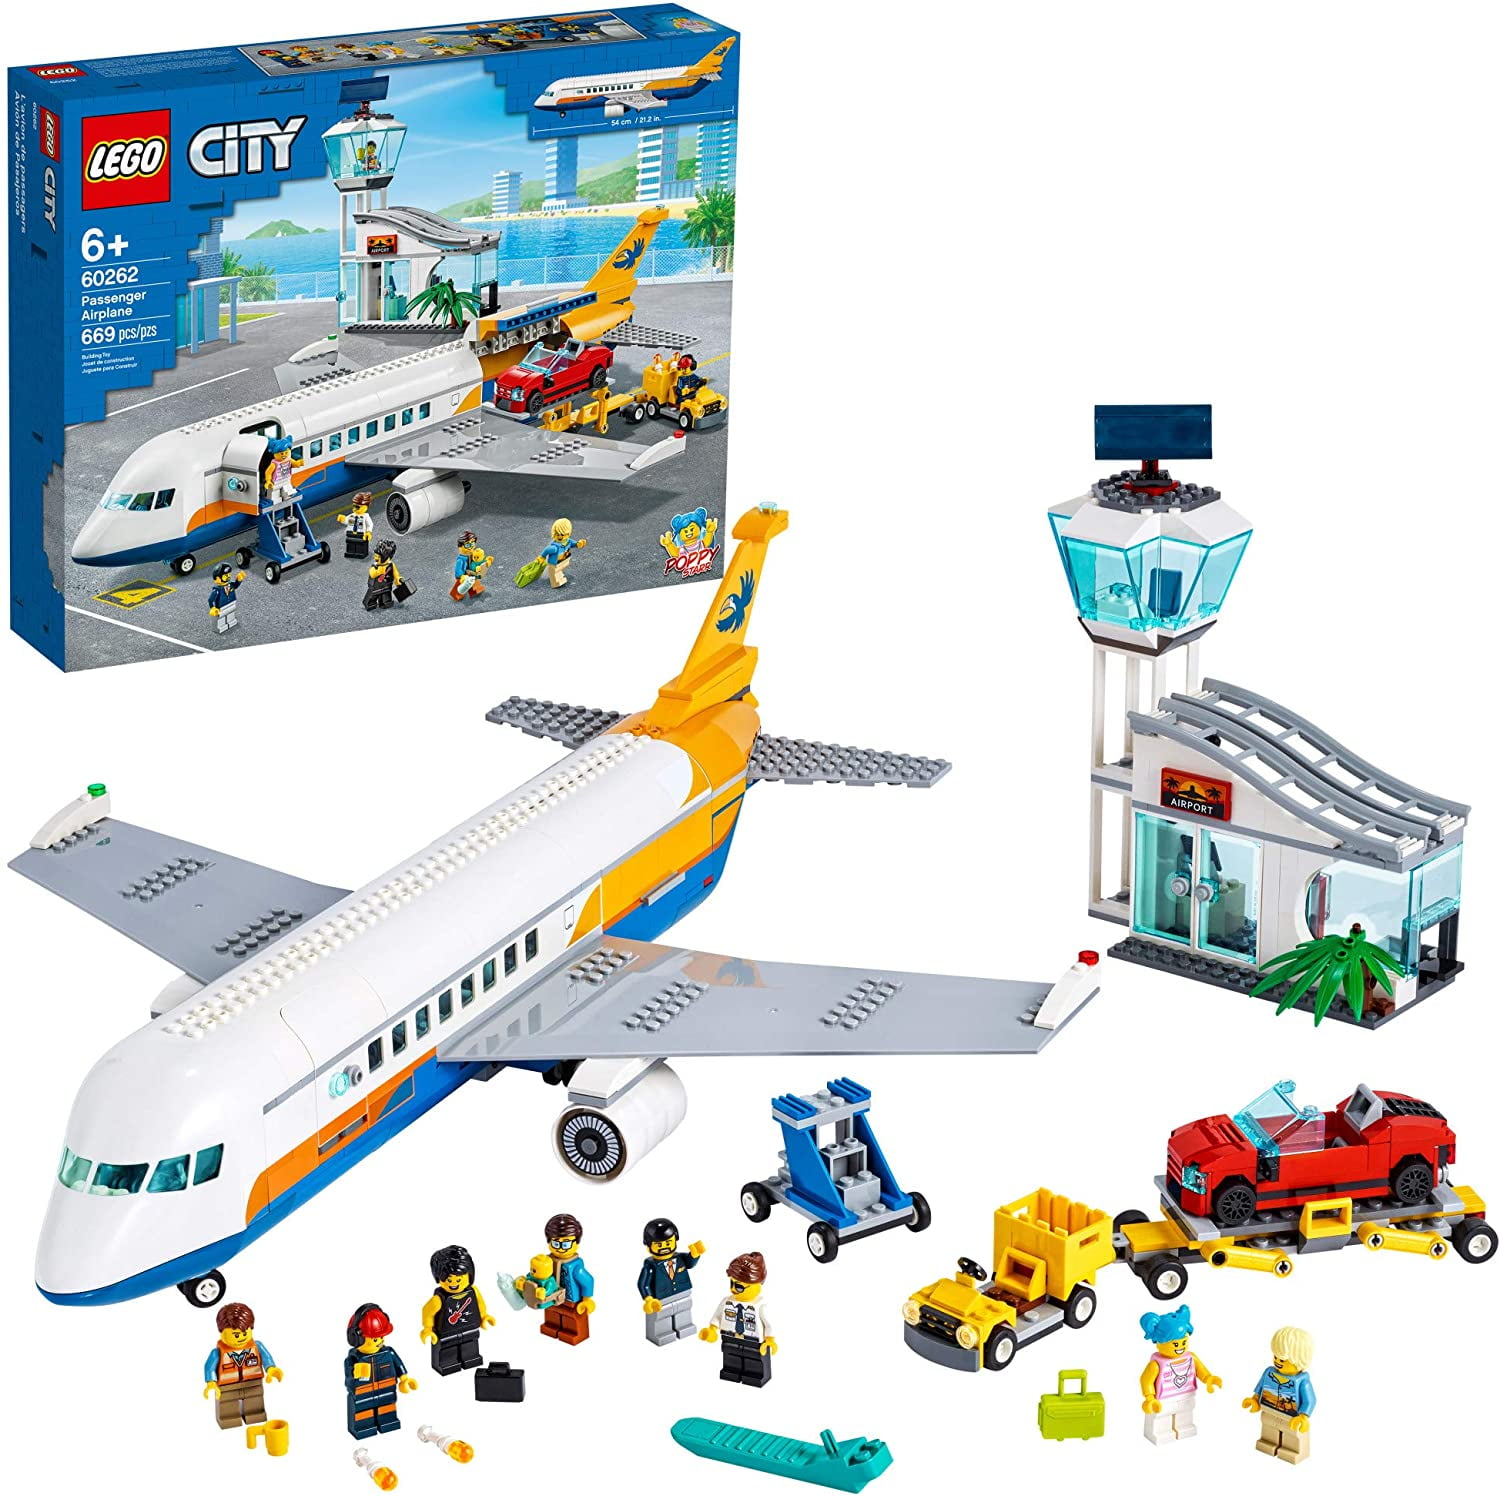 LEGO City Passenger Airplane 60262, with Radar Tower, Airport Truck